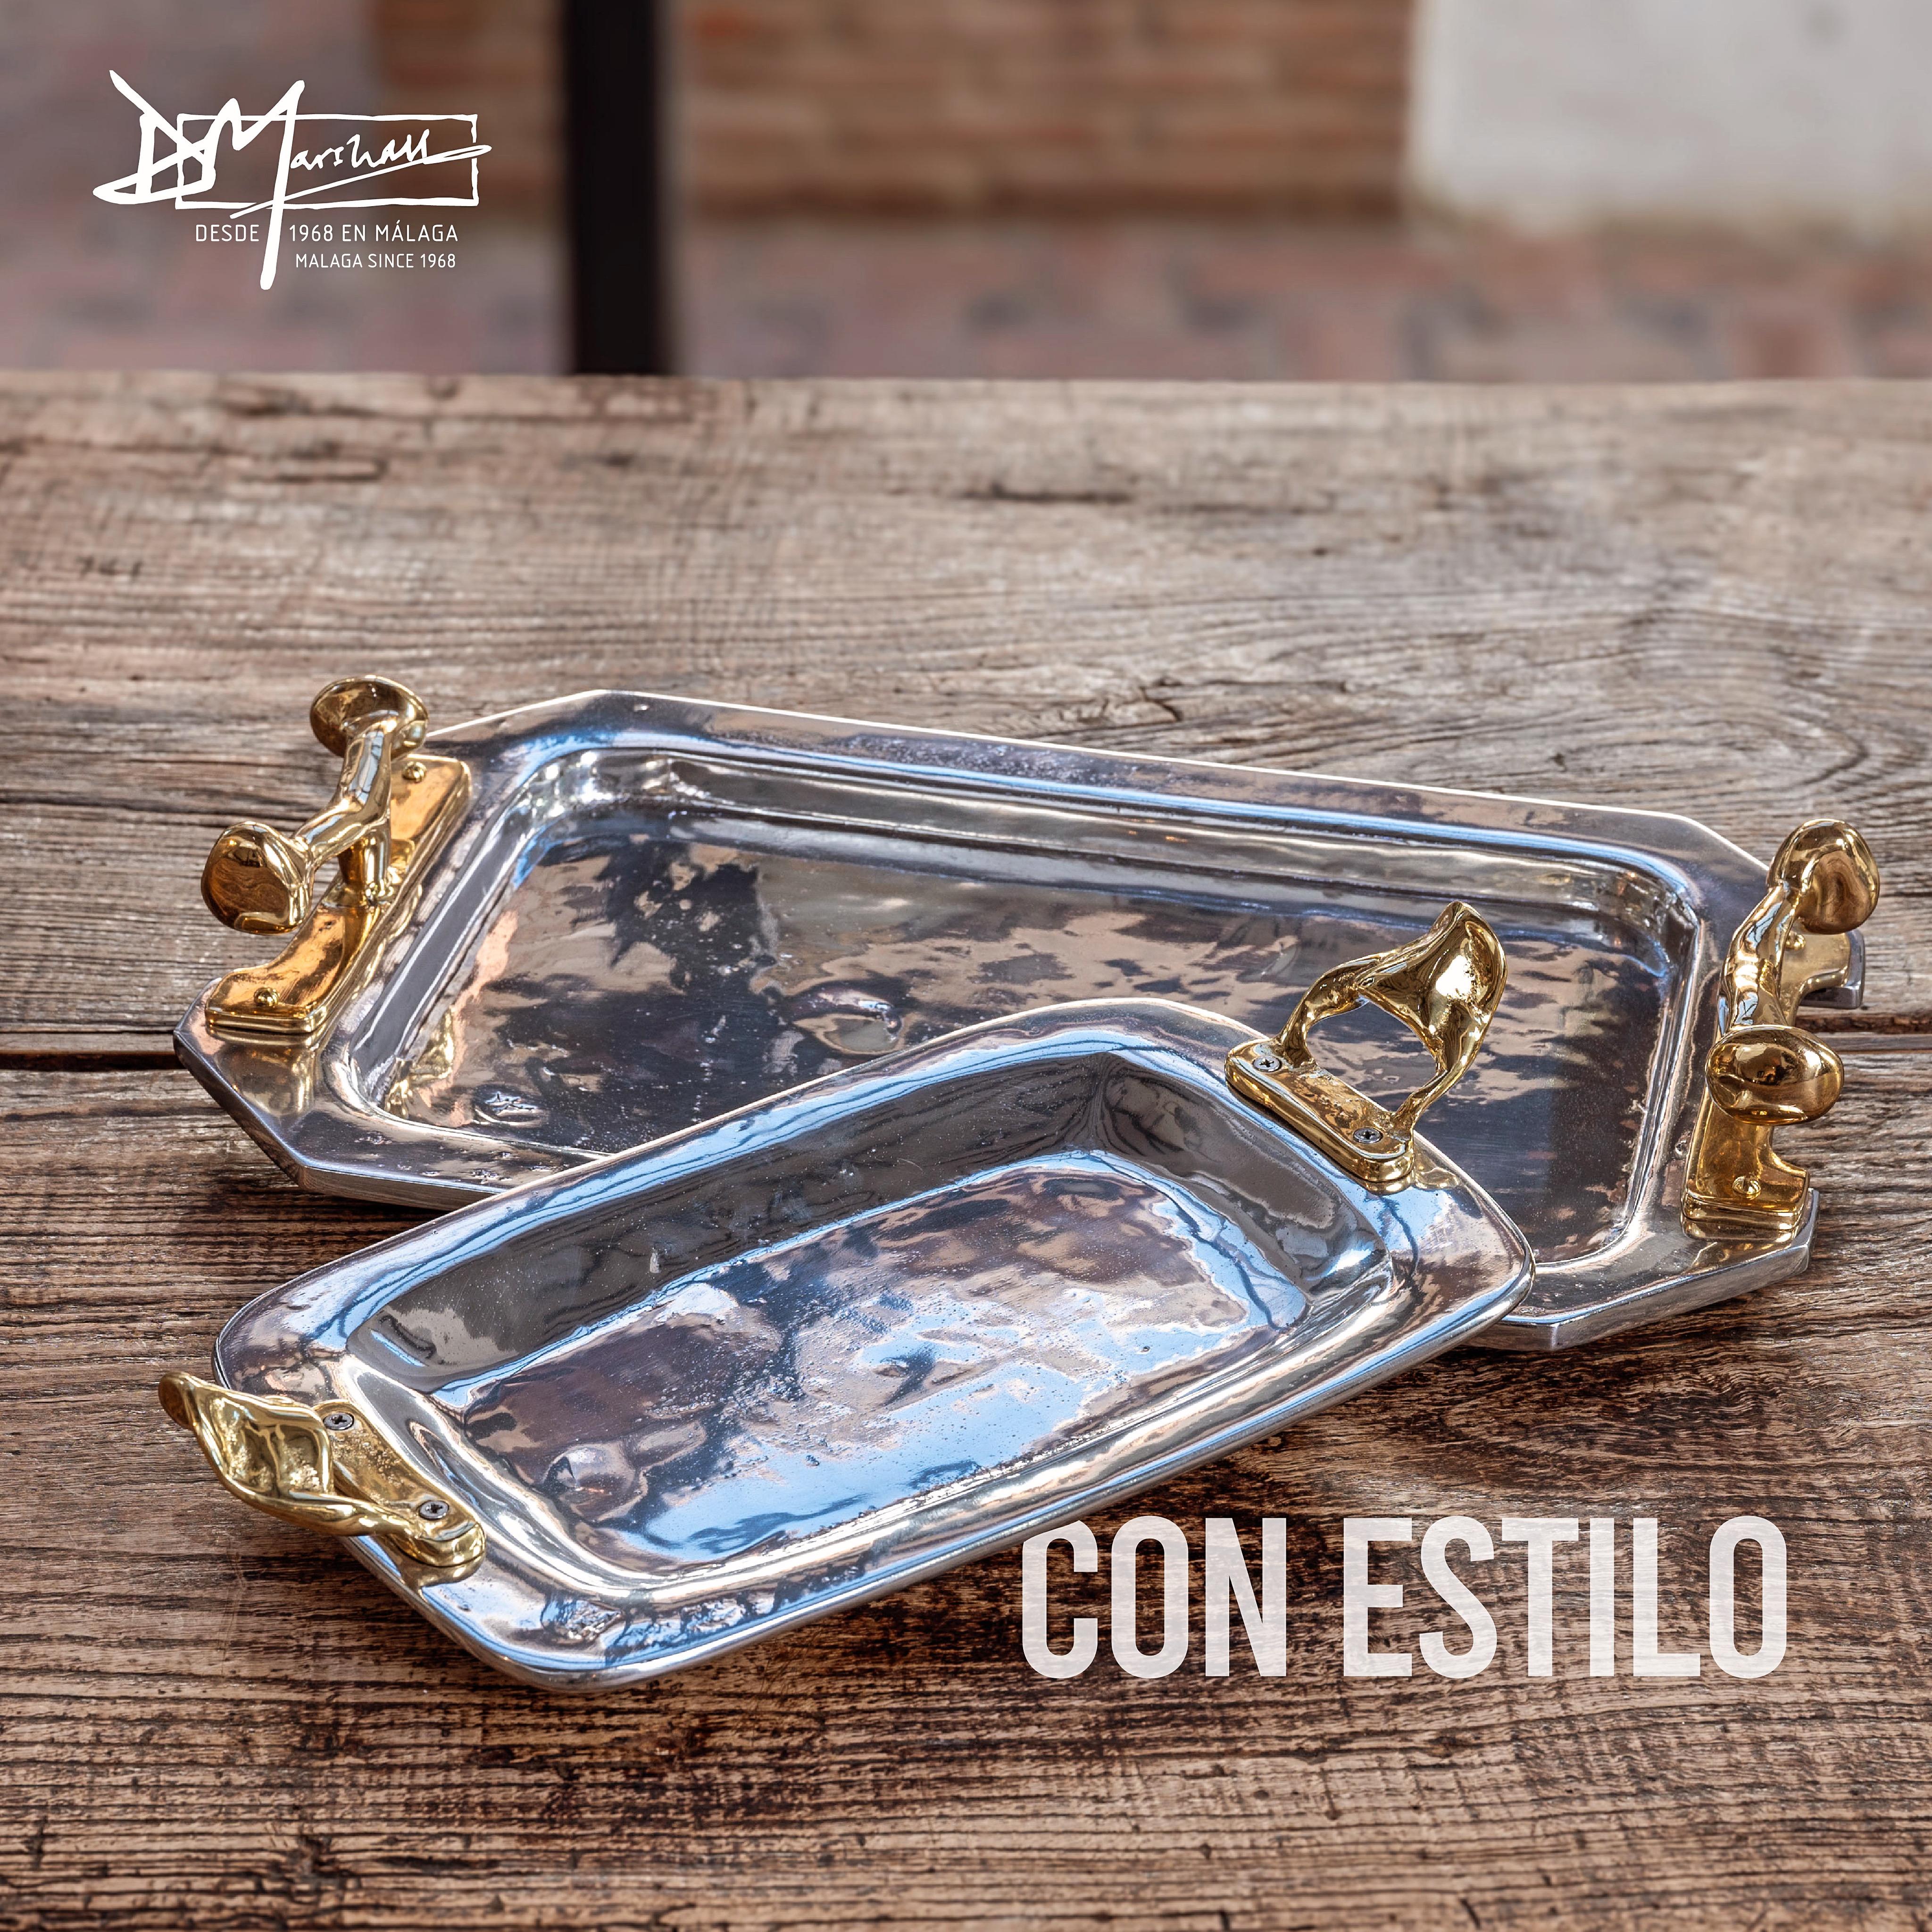 The decorative Tray was created by David Marshall, it is made of  sand cast brass. 
Handmade, mounted and finished in our foundry and workshop in Spain from recycled materials.
Certified authentic by the Artist David Marshall with his signature.
The